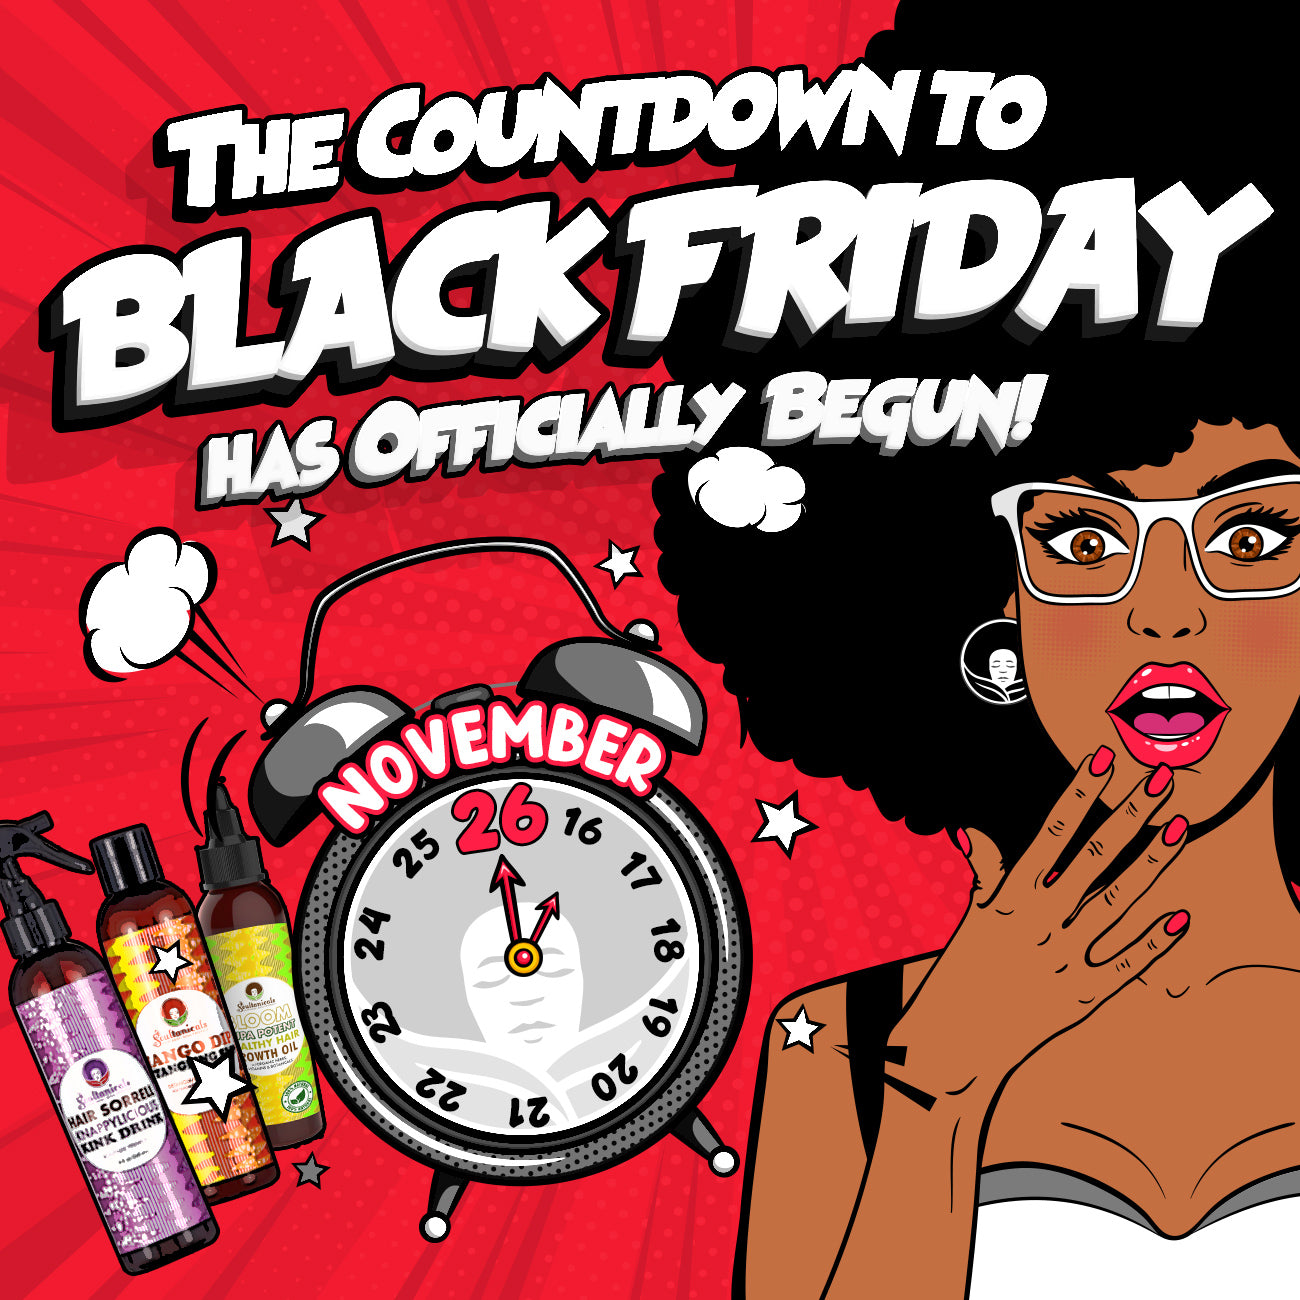 The Countdown to Black Friday is in effect!